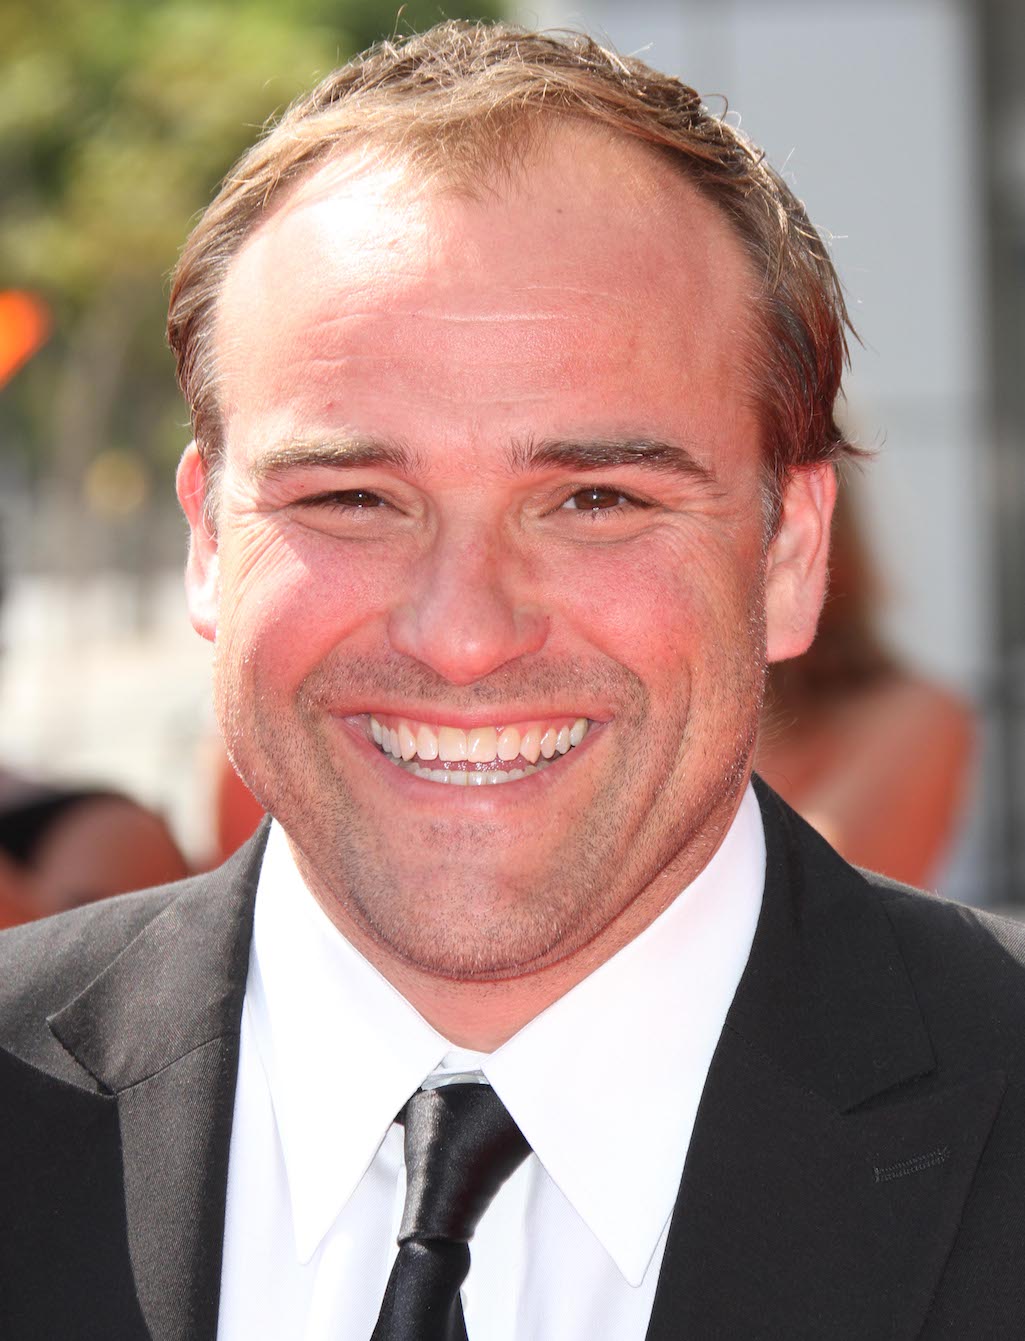 David Dominick DeLuise is an American actor, voice actor, comedian, and tel...